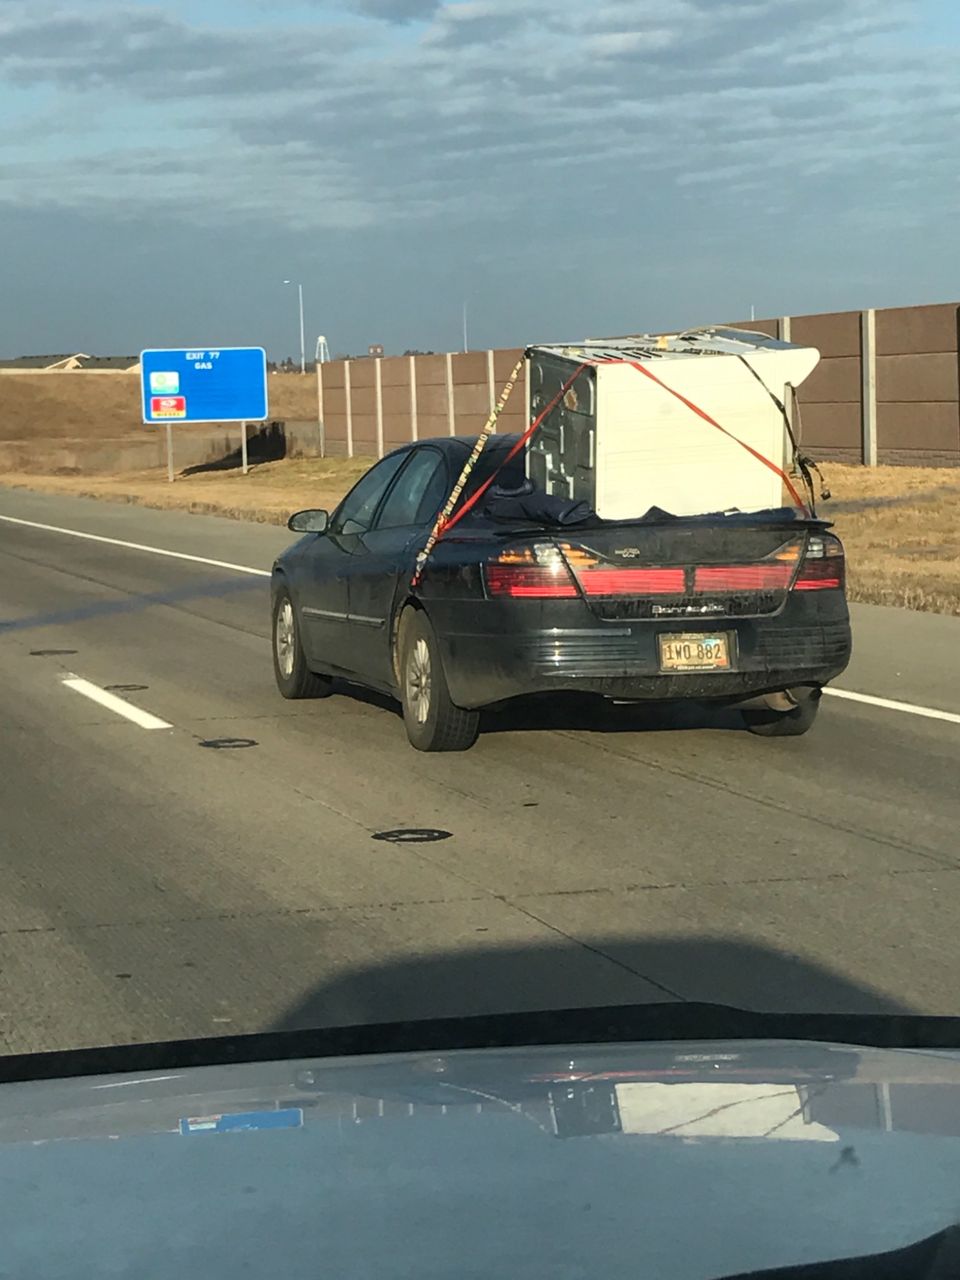 Who needs a truck!